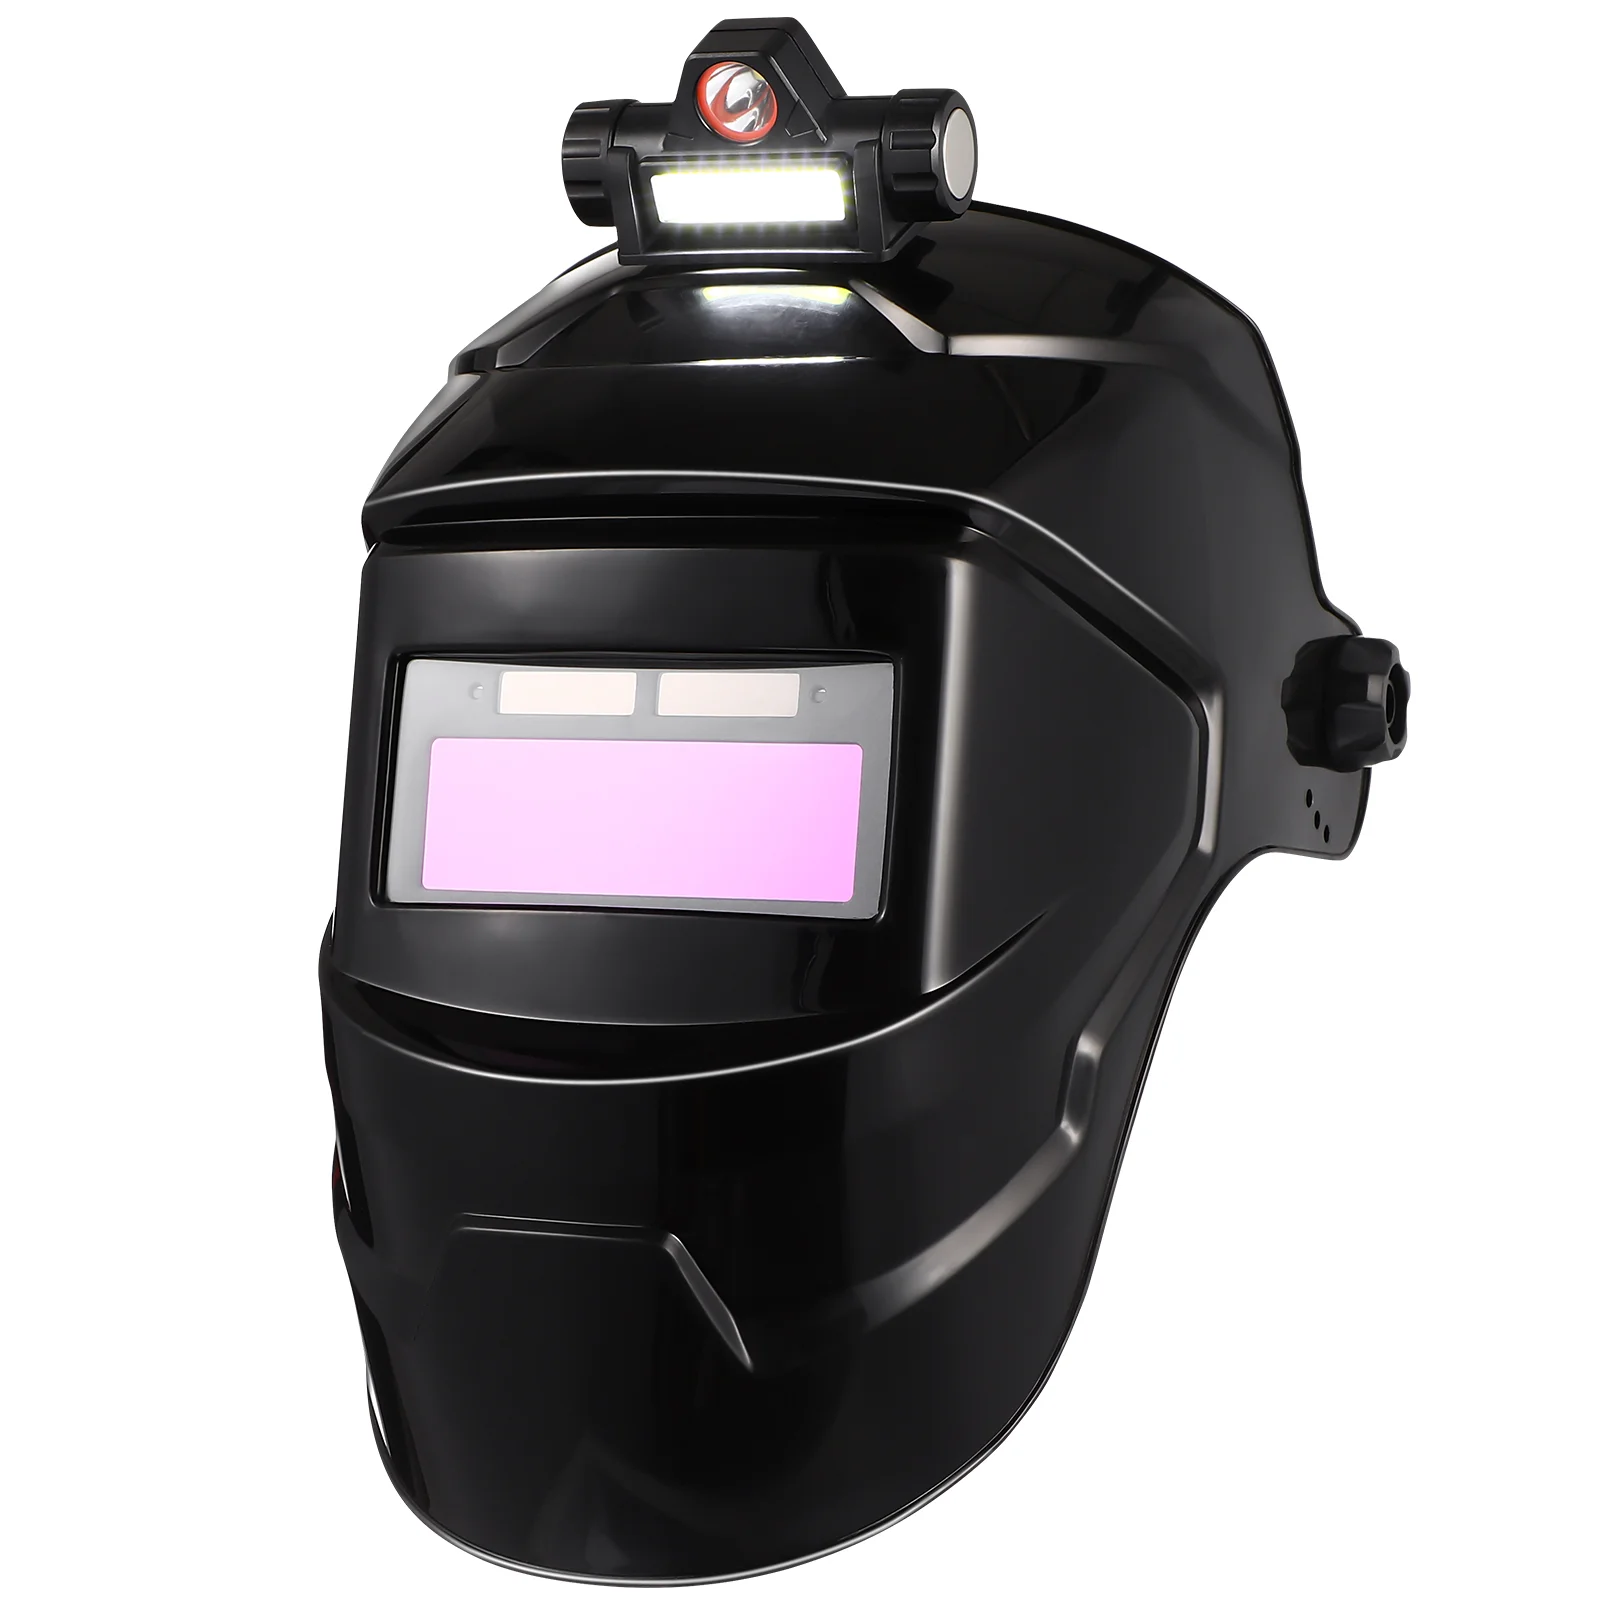 

Face Mask Auto Darkening Welding Hood Automatic Welder Light Head-mounted Pp Solar Powered Safety for